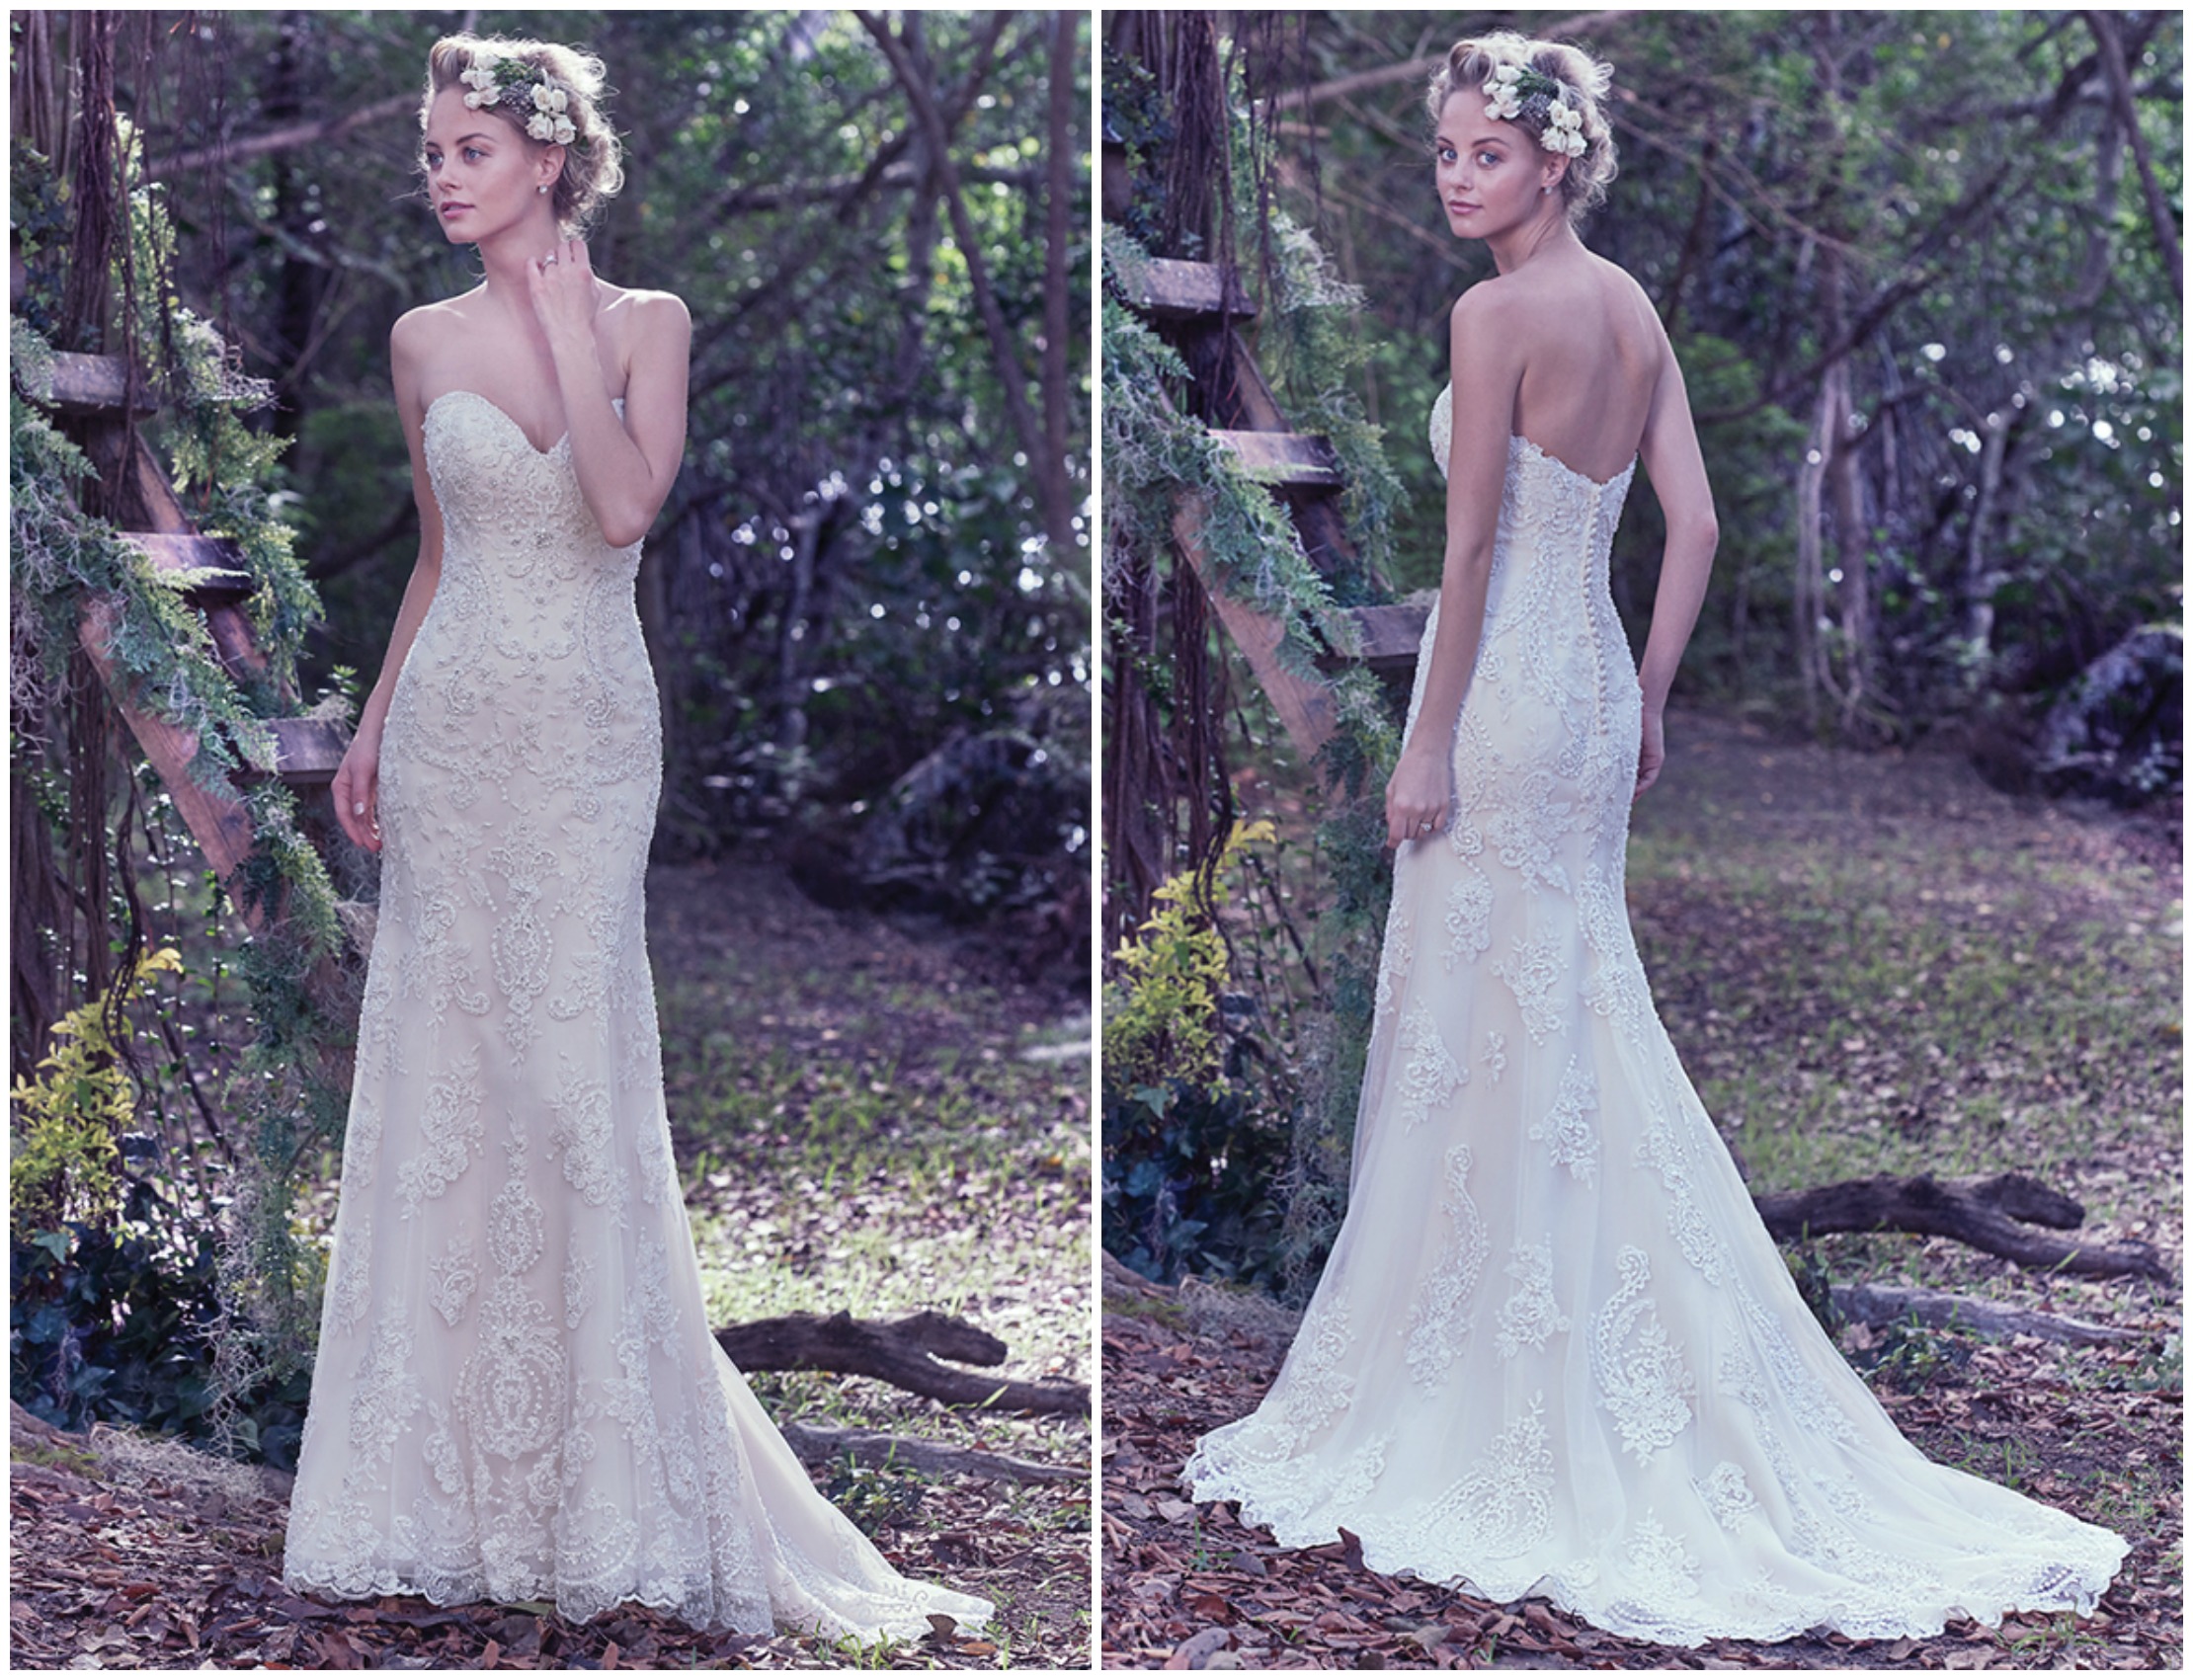 Romance is found in this classic tulle and lace sheath wedding dress, adorned with Swarovski crystals. Complete with a feminine sweetheart neckline and covered buttons over zipper and inner corset closure. 

<a href="https://www.maggiesottero.com/maggie-sottero/jordan/9685" target="_blank">Maggie Sottero</a>